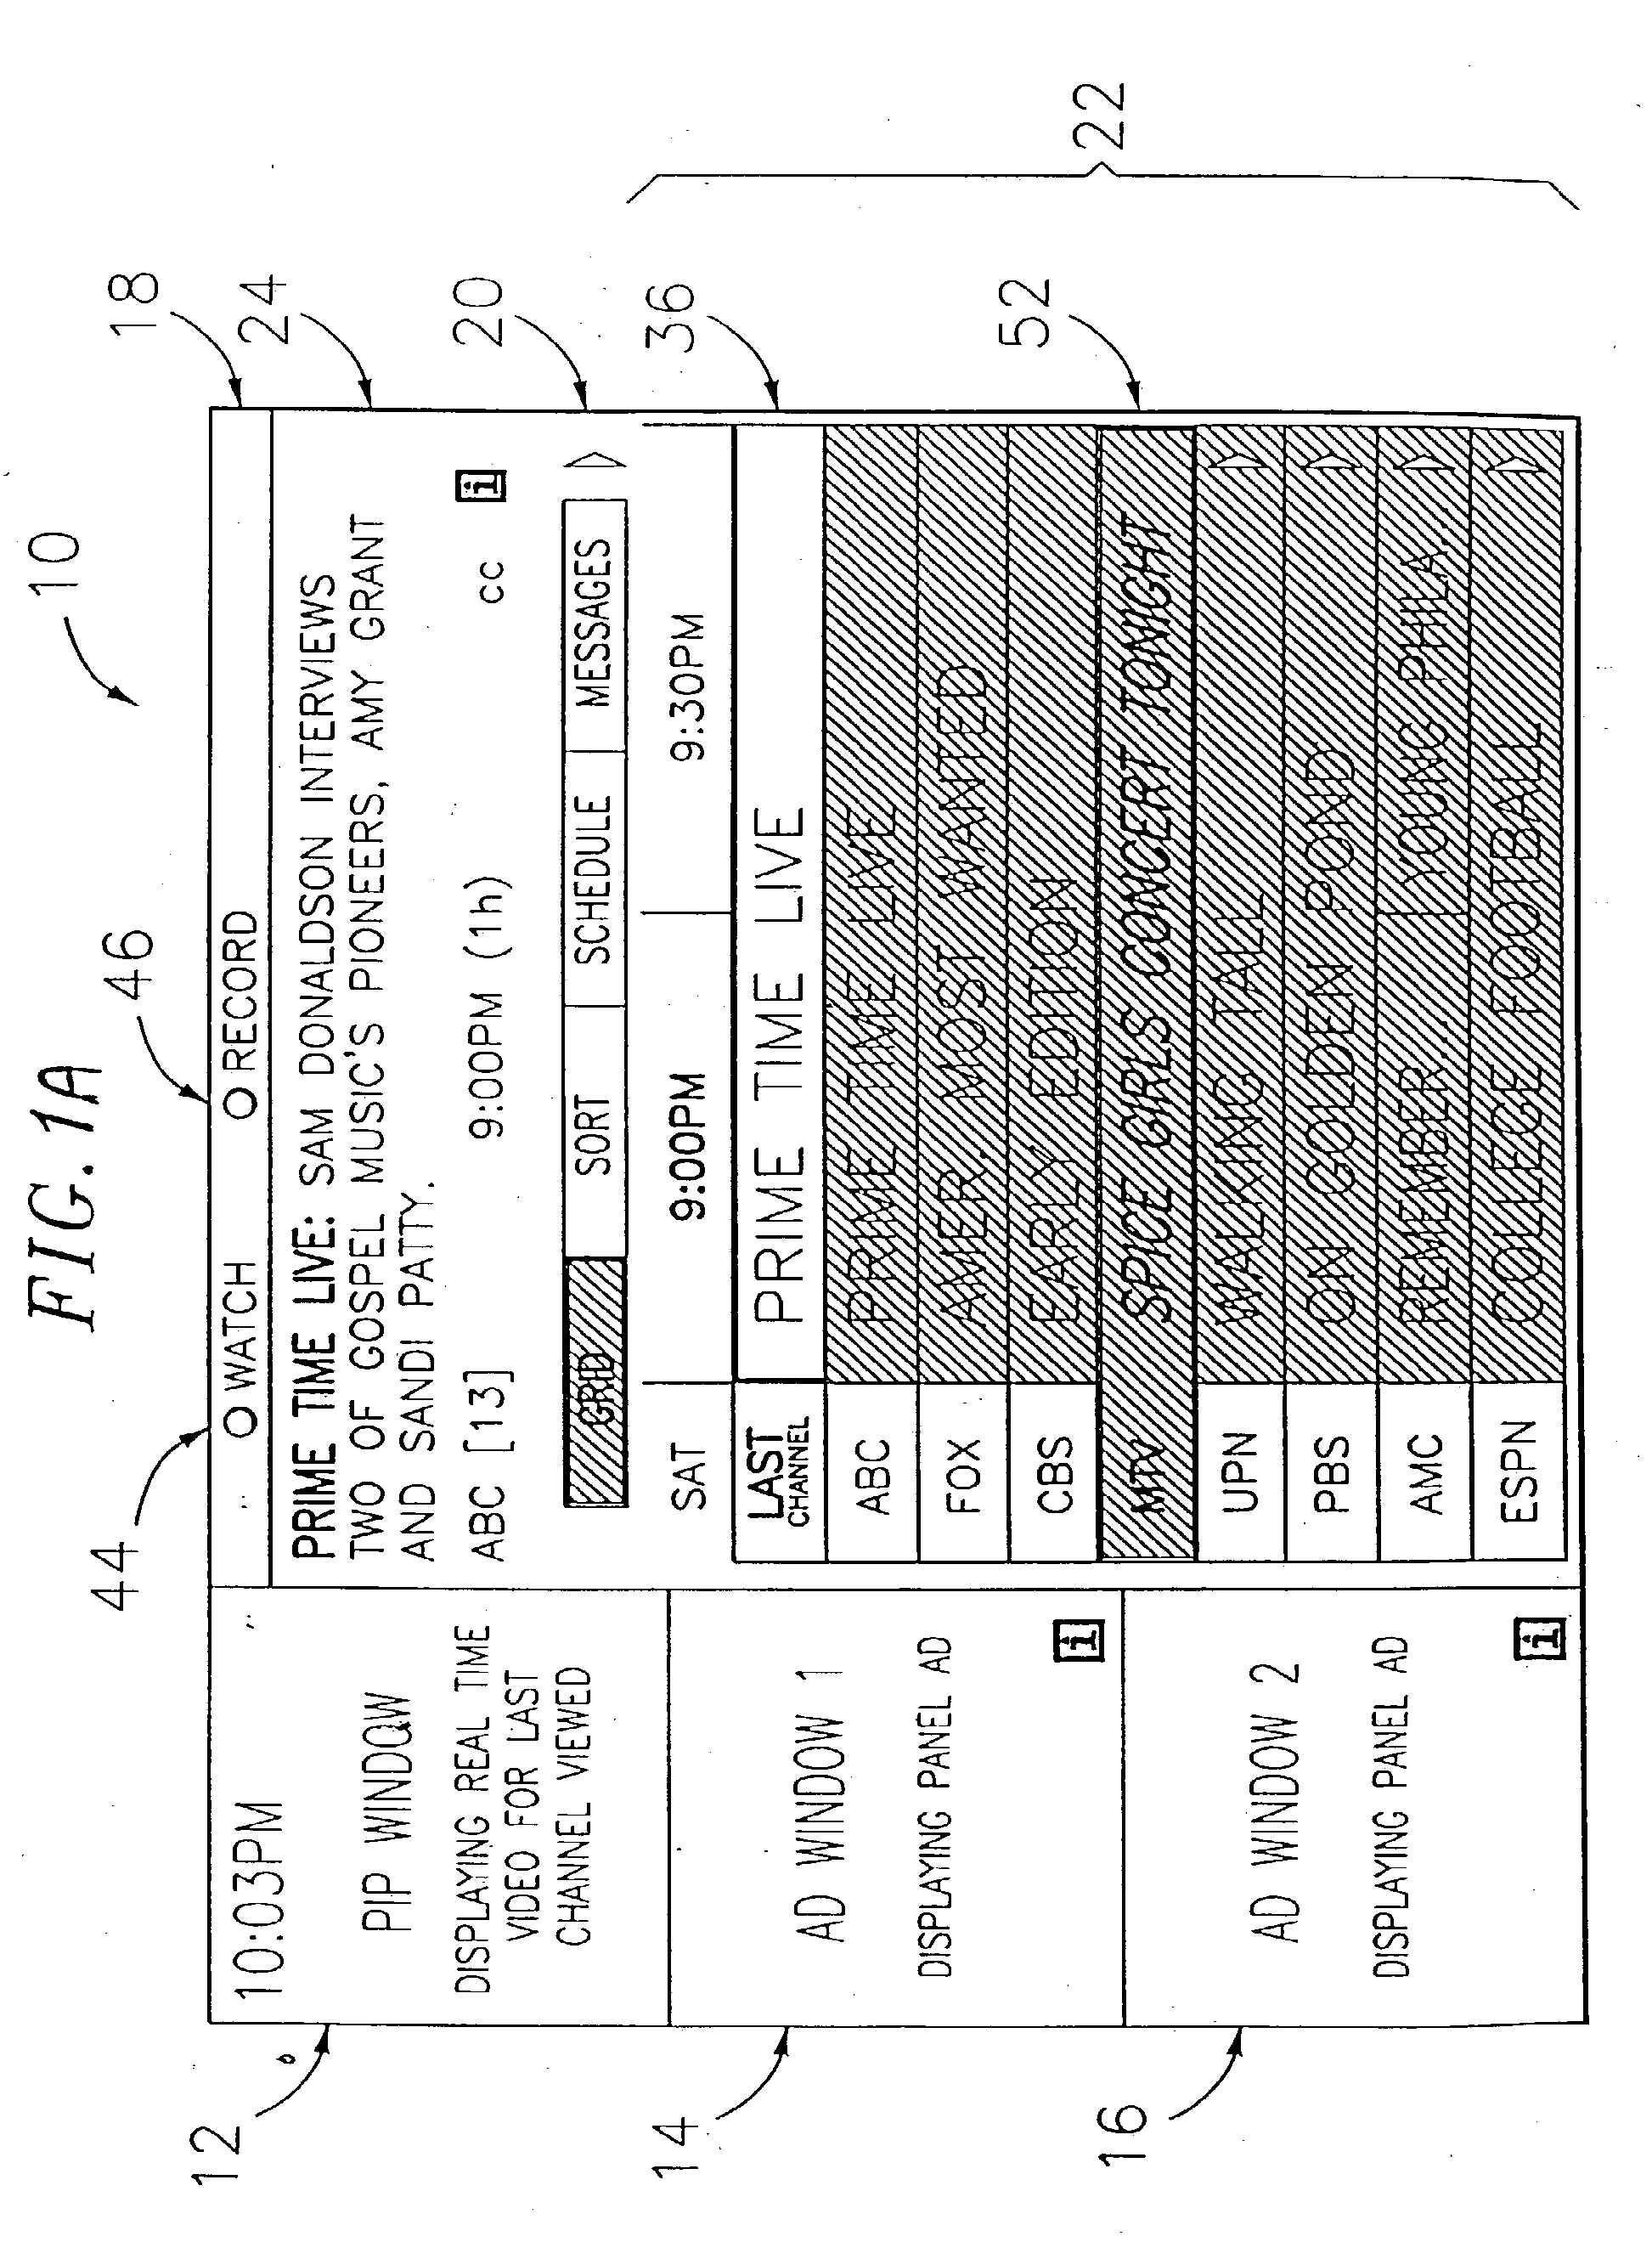 Systems and methods for capturing video related to products